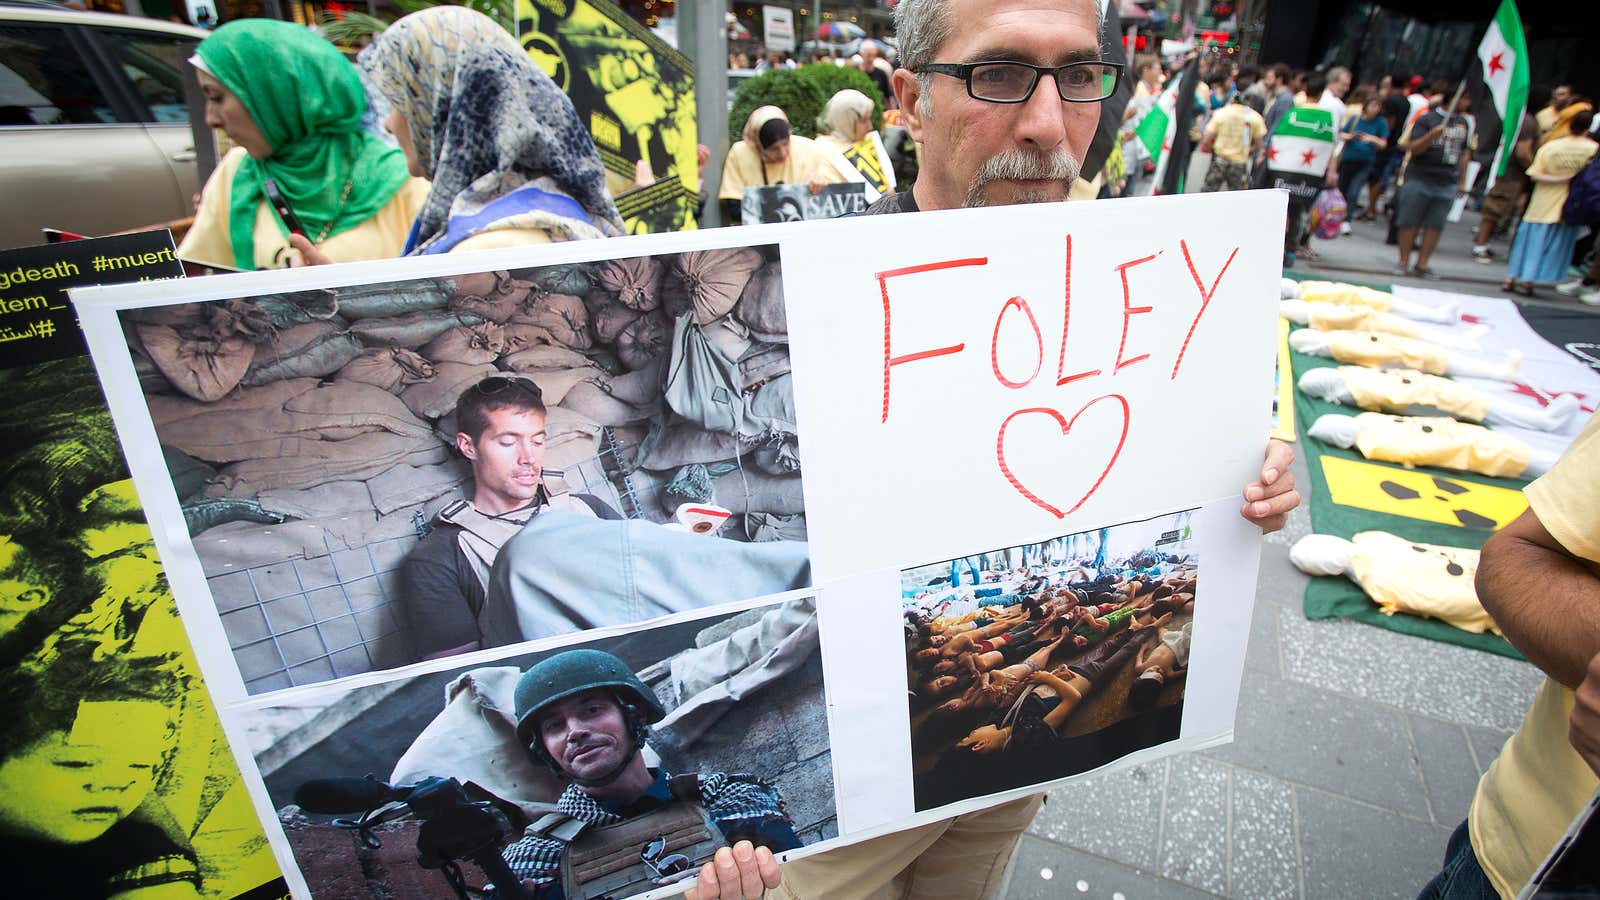 A man holds up a sign in memory of U.S. journalist James Foley during a protest against the Assad regime.